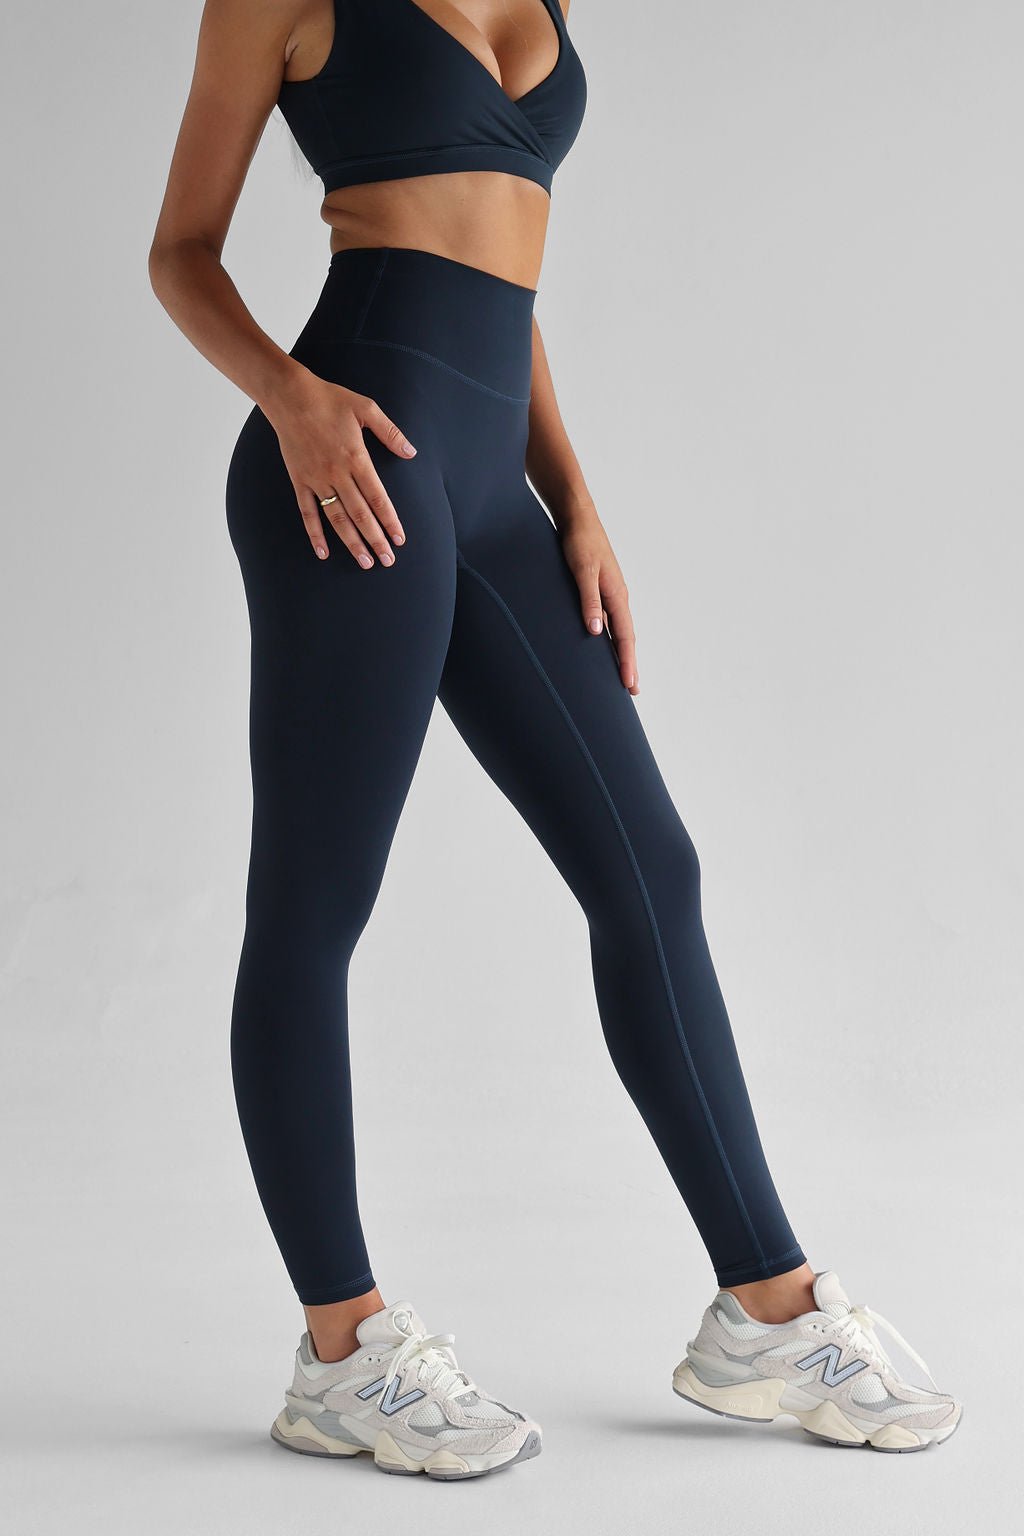 Best Leggings Ever :: Sloan Leggings in Double Brushed Poly - A